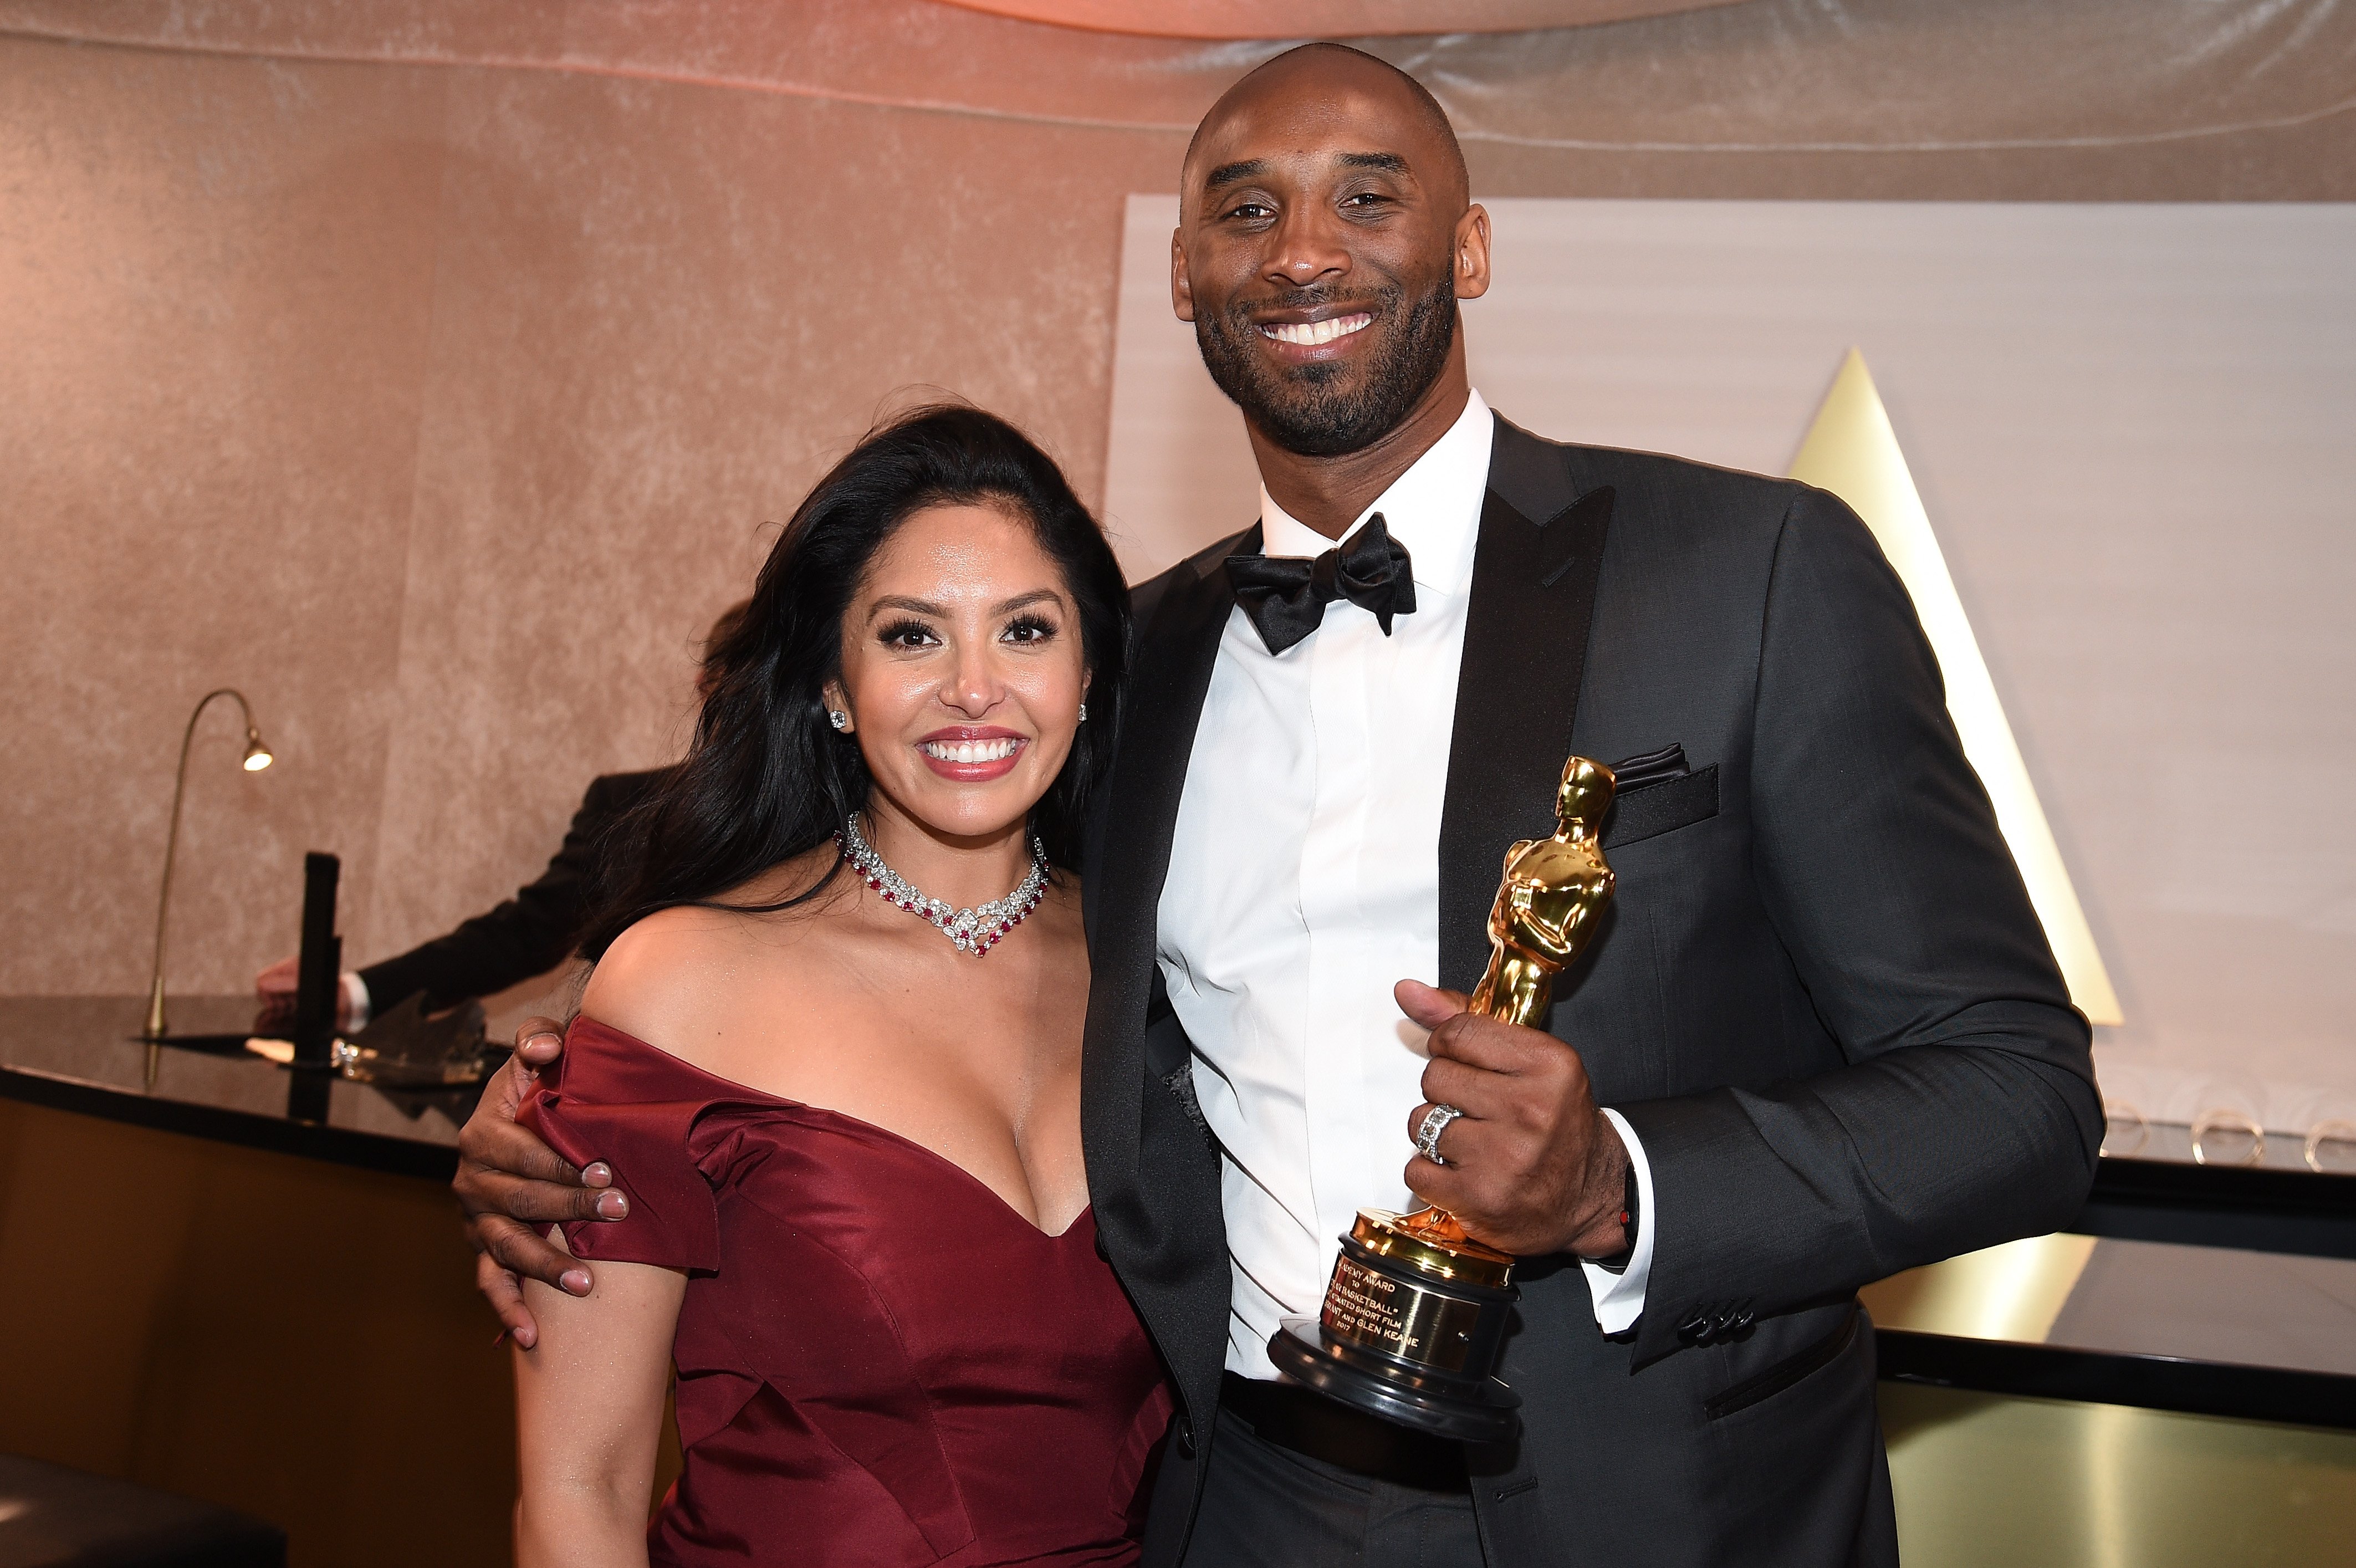 Kobe Bryant & Vanessa Bryant at the 90th Annual Academy Awards Governors Ball on March 4, 2018 in California | Photo: Getty Images